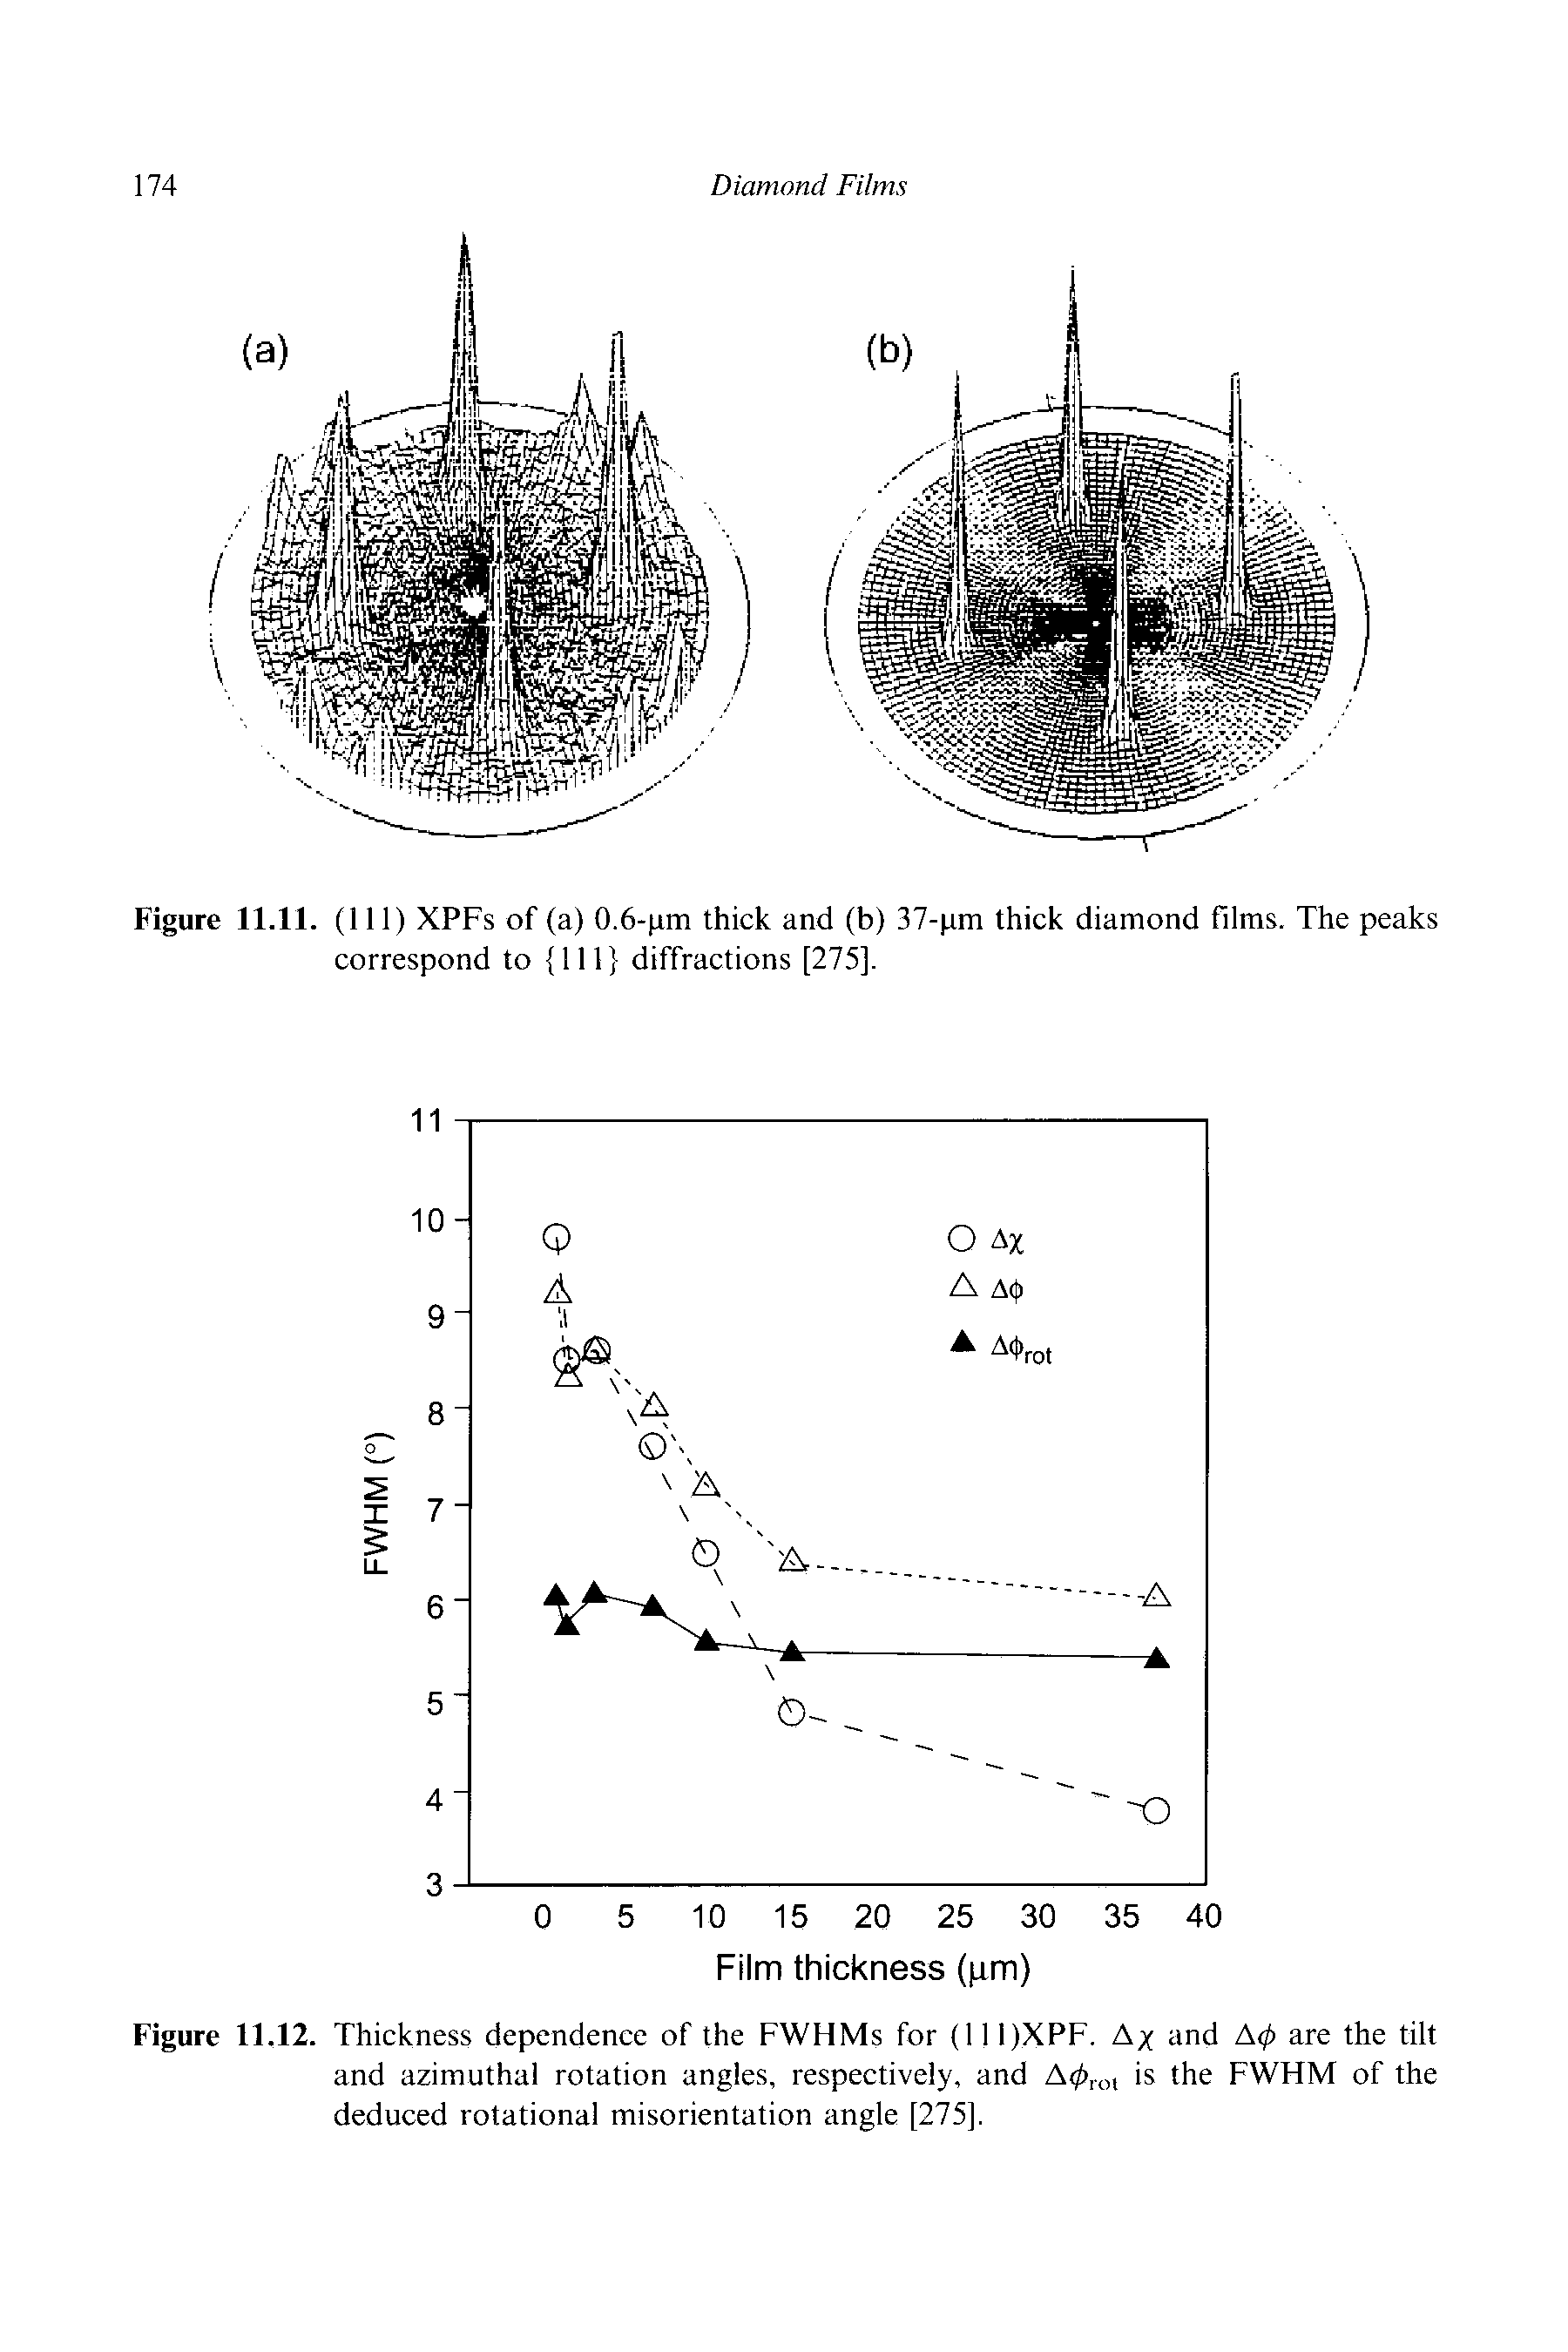 Figure 11.12. Thickness dependence of the FWHMs for (11 l)XPF. Ax and A(p are the tilt and azimuthal rotation angles, respectively, and A0,ot is the FWHM of the deduced rotational misorientation angle [275],...